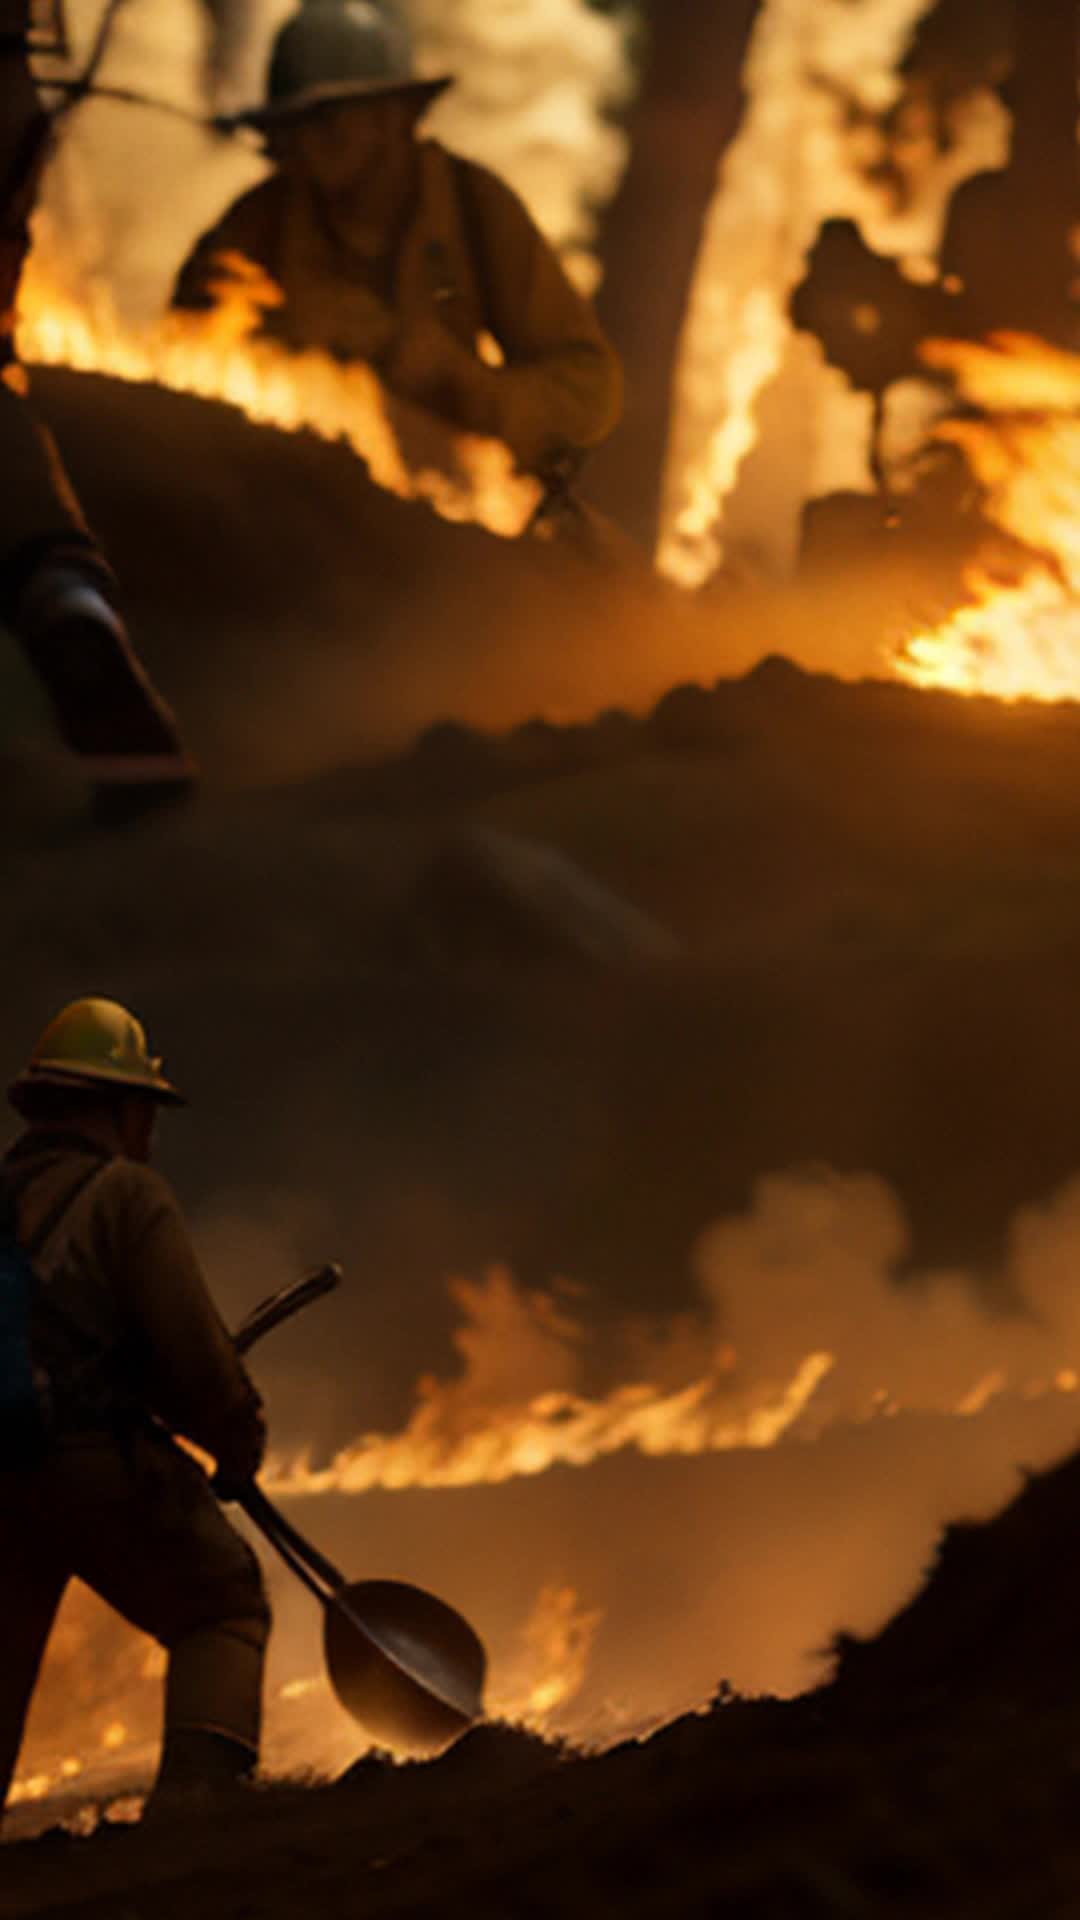 Joint endeavor of forest animals and humans, tirelessly working, digging trenches, carrying water buckets, desperate fight to save forest, high-stakes, fast-paced action, vivid contrasts, wildfire in background, detailed, sharp focus, twilight lighting